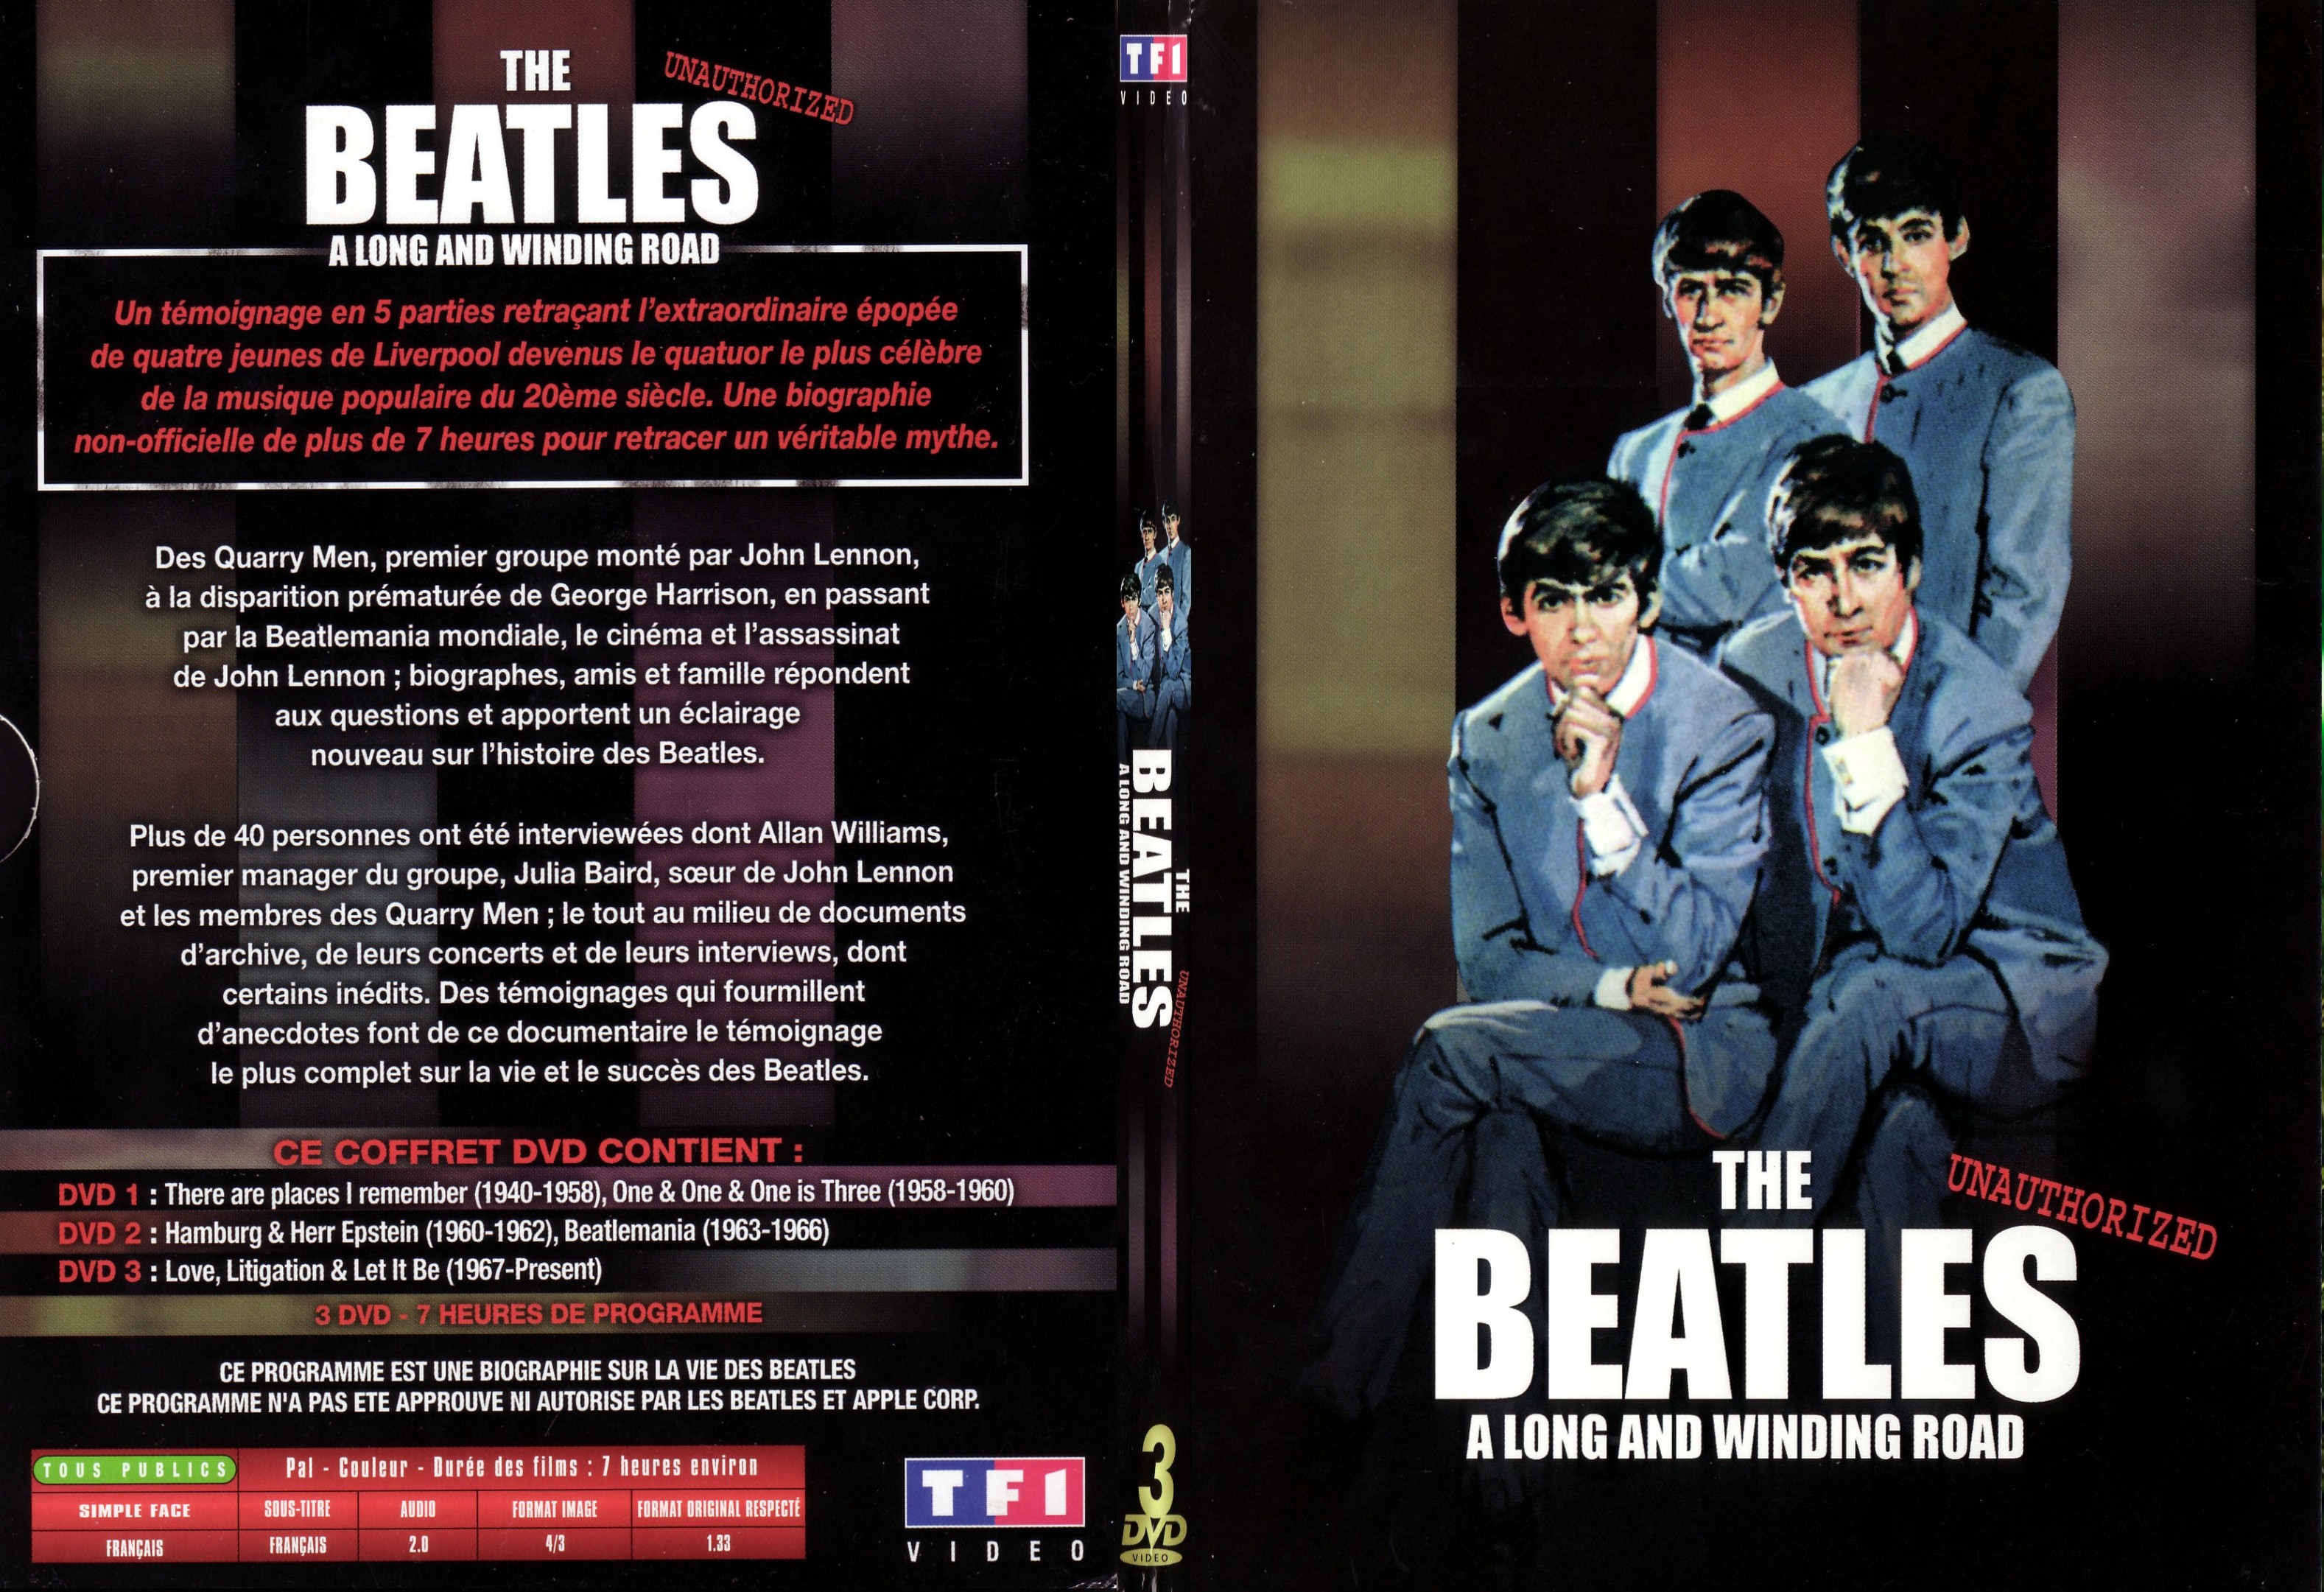 Jaquette DVD The Beatles a long and winding road - SLIM